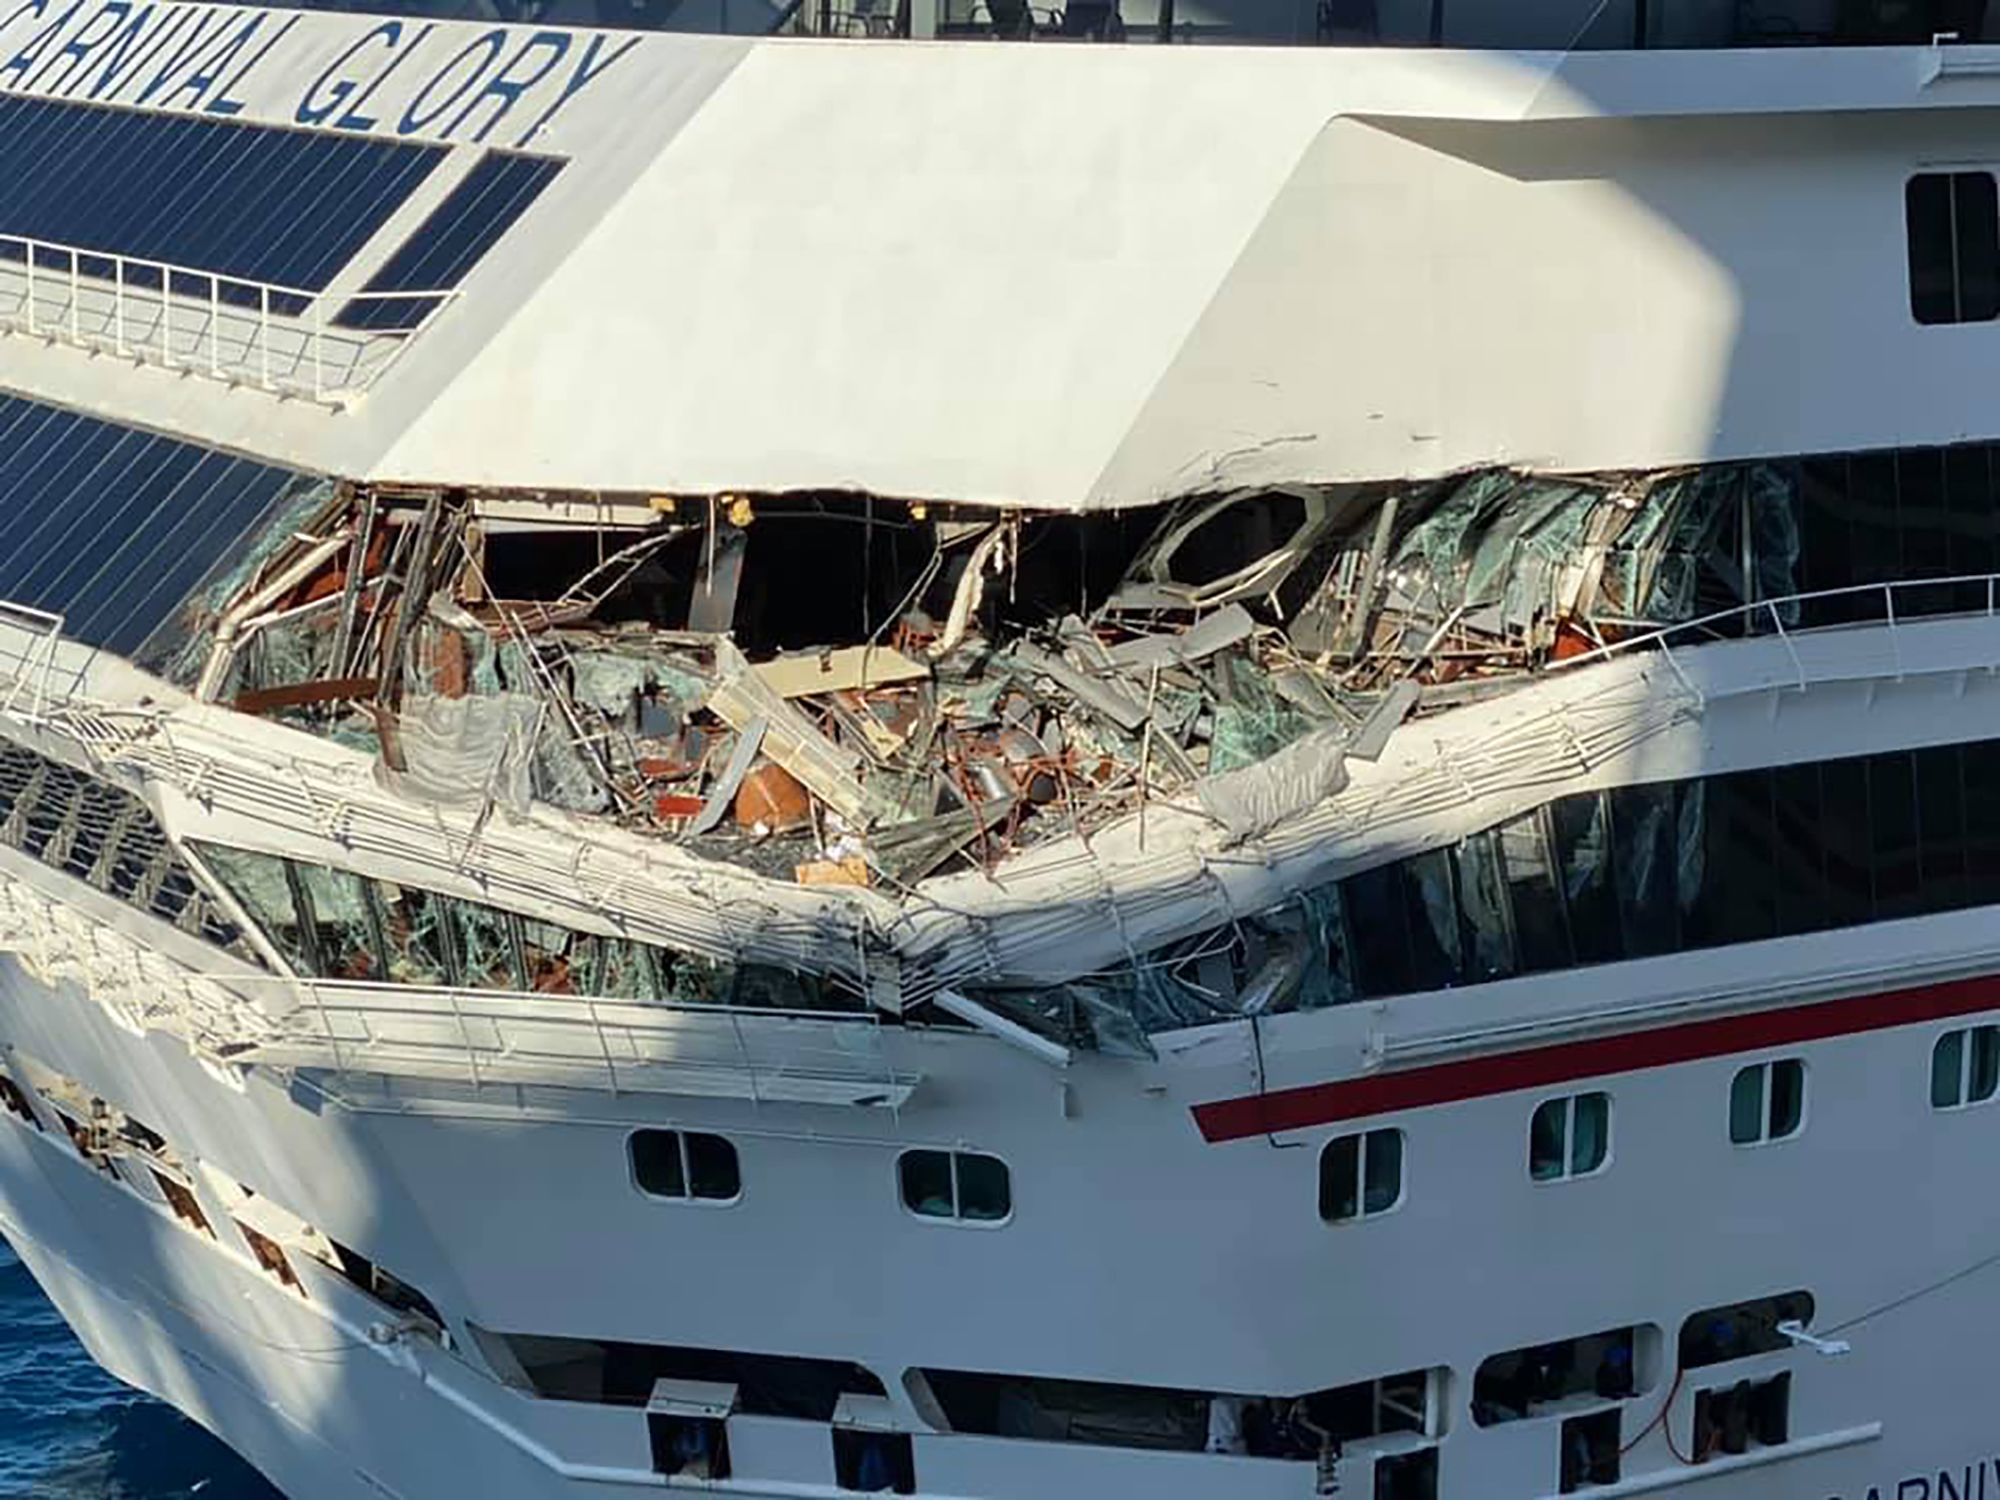 Two Carnival cruise ships collided in Cozumel, Mexico | CNN Business